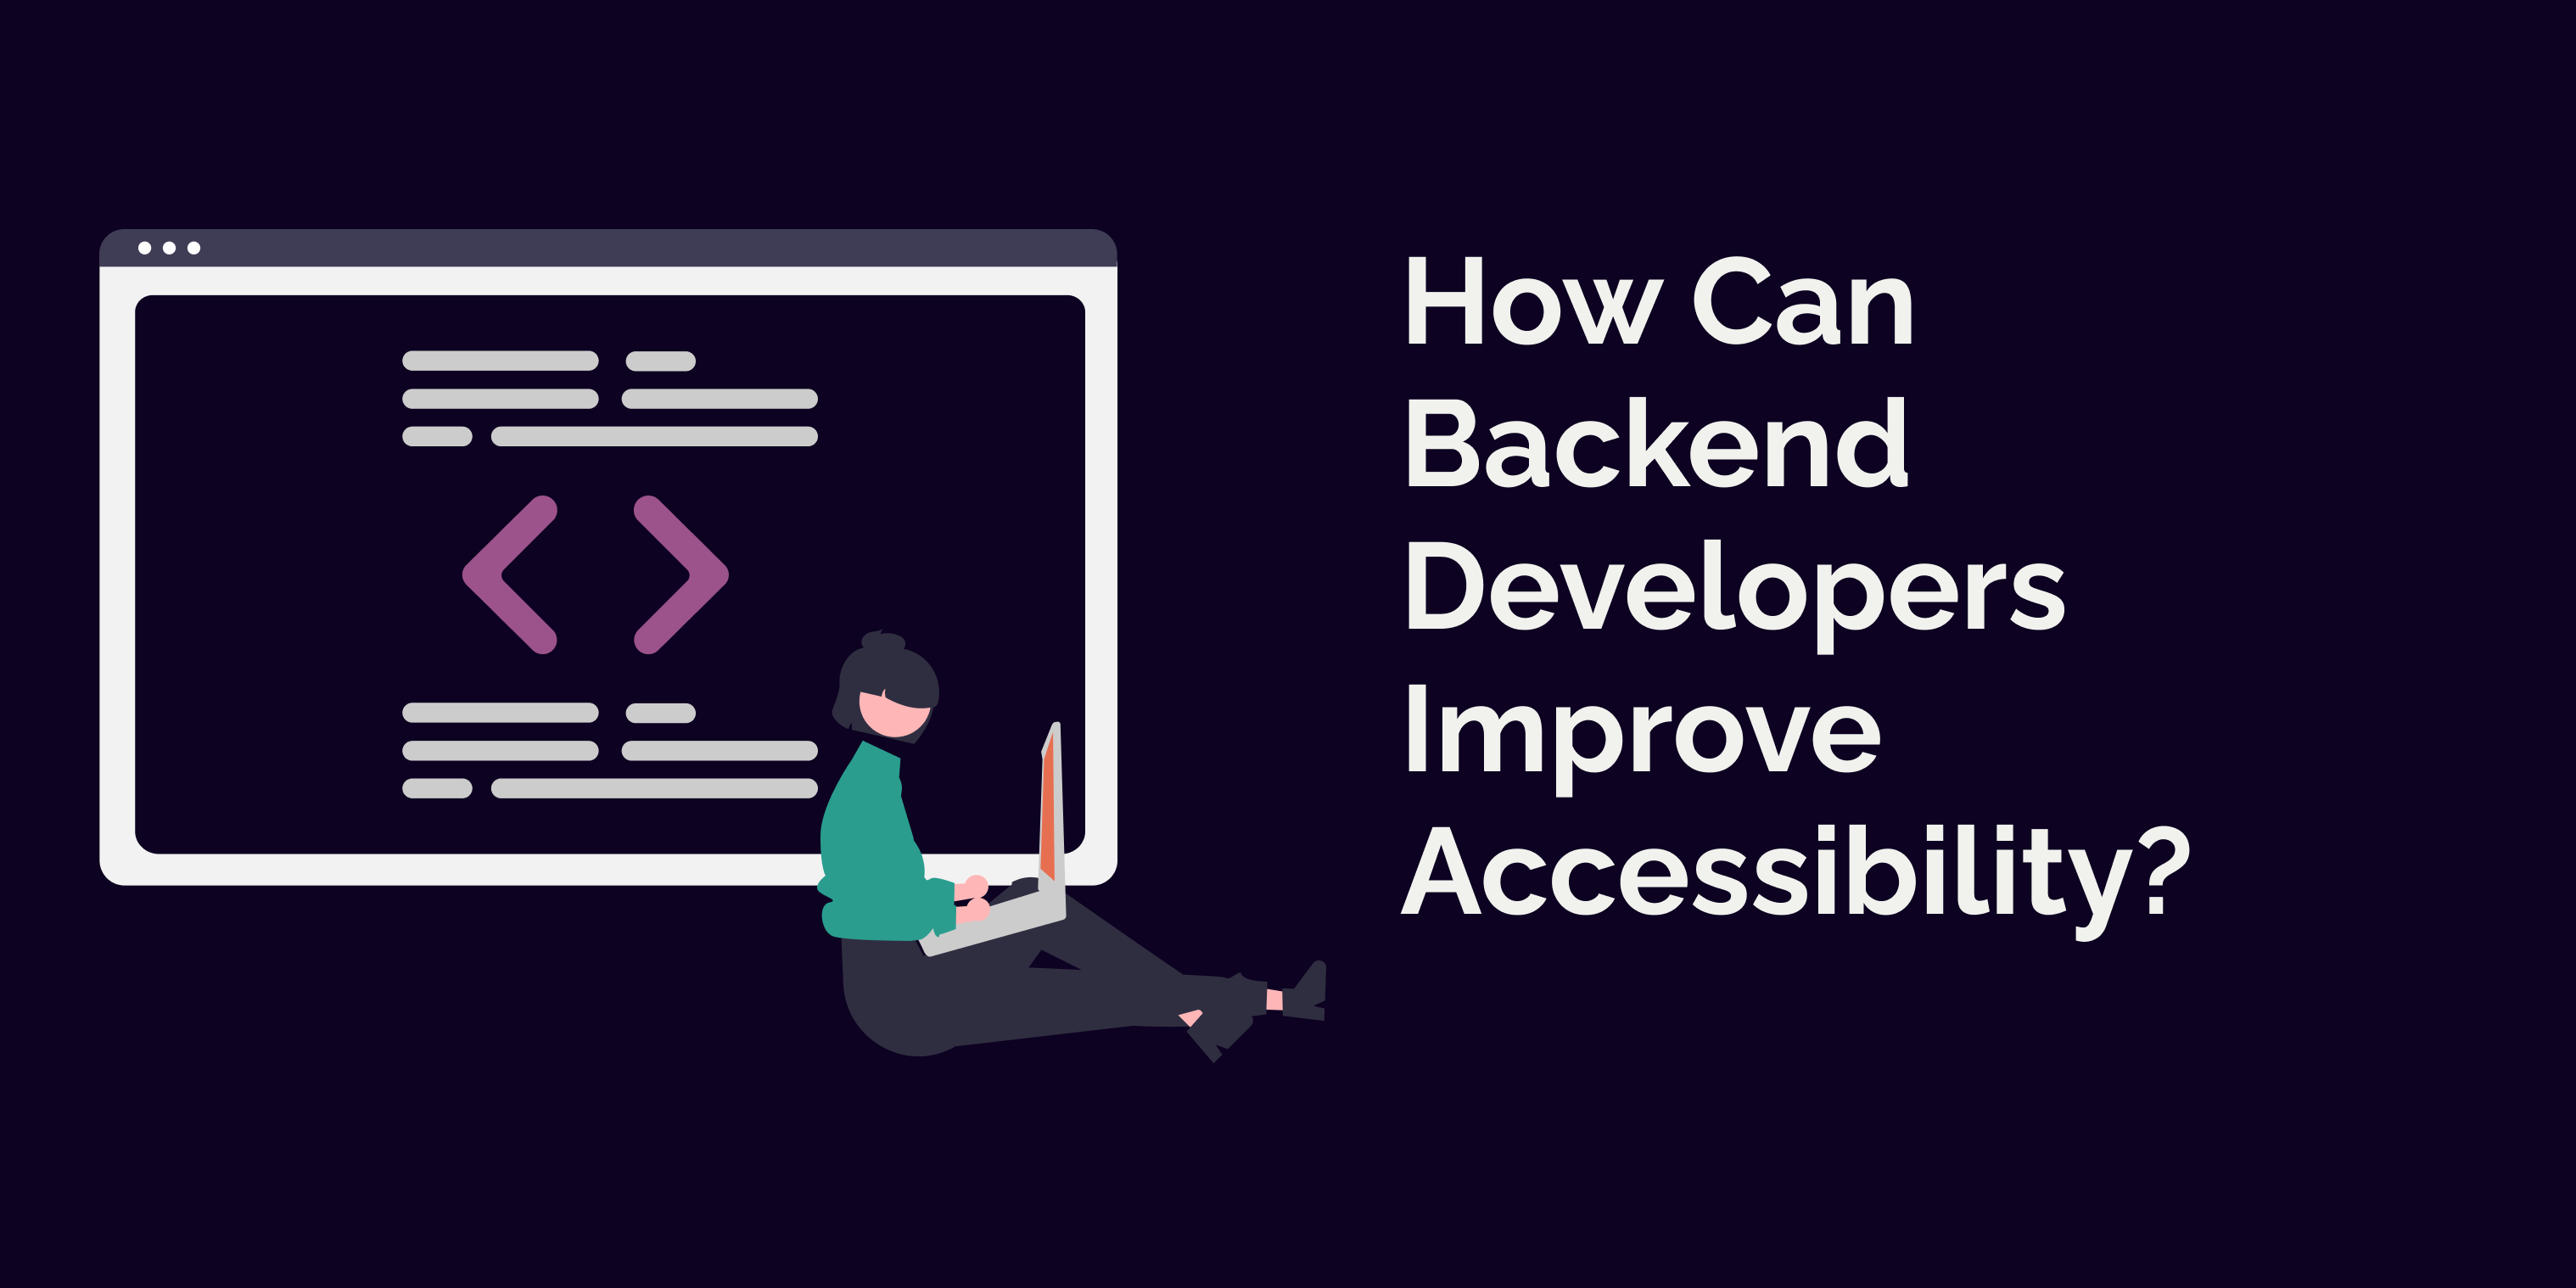 How can Backend Developers Improve Accessibility?